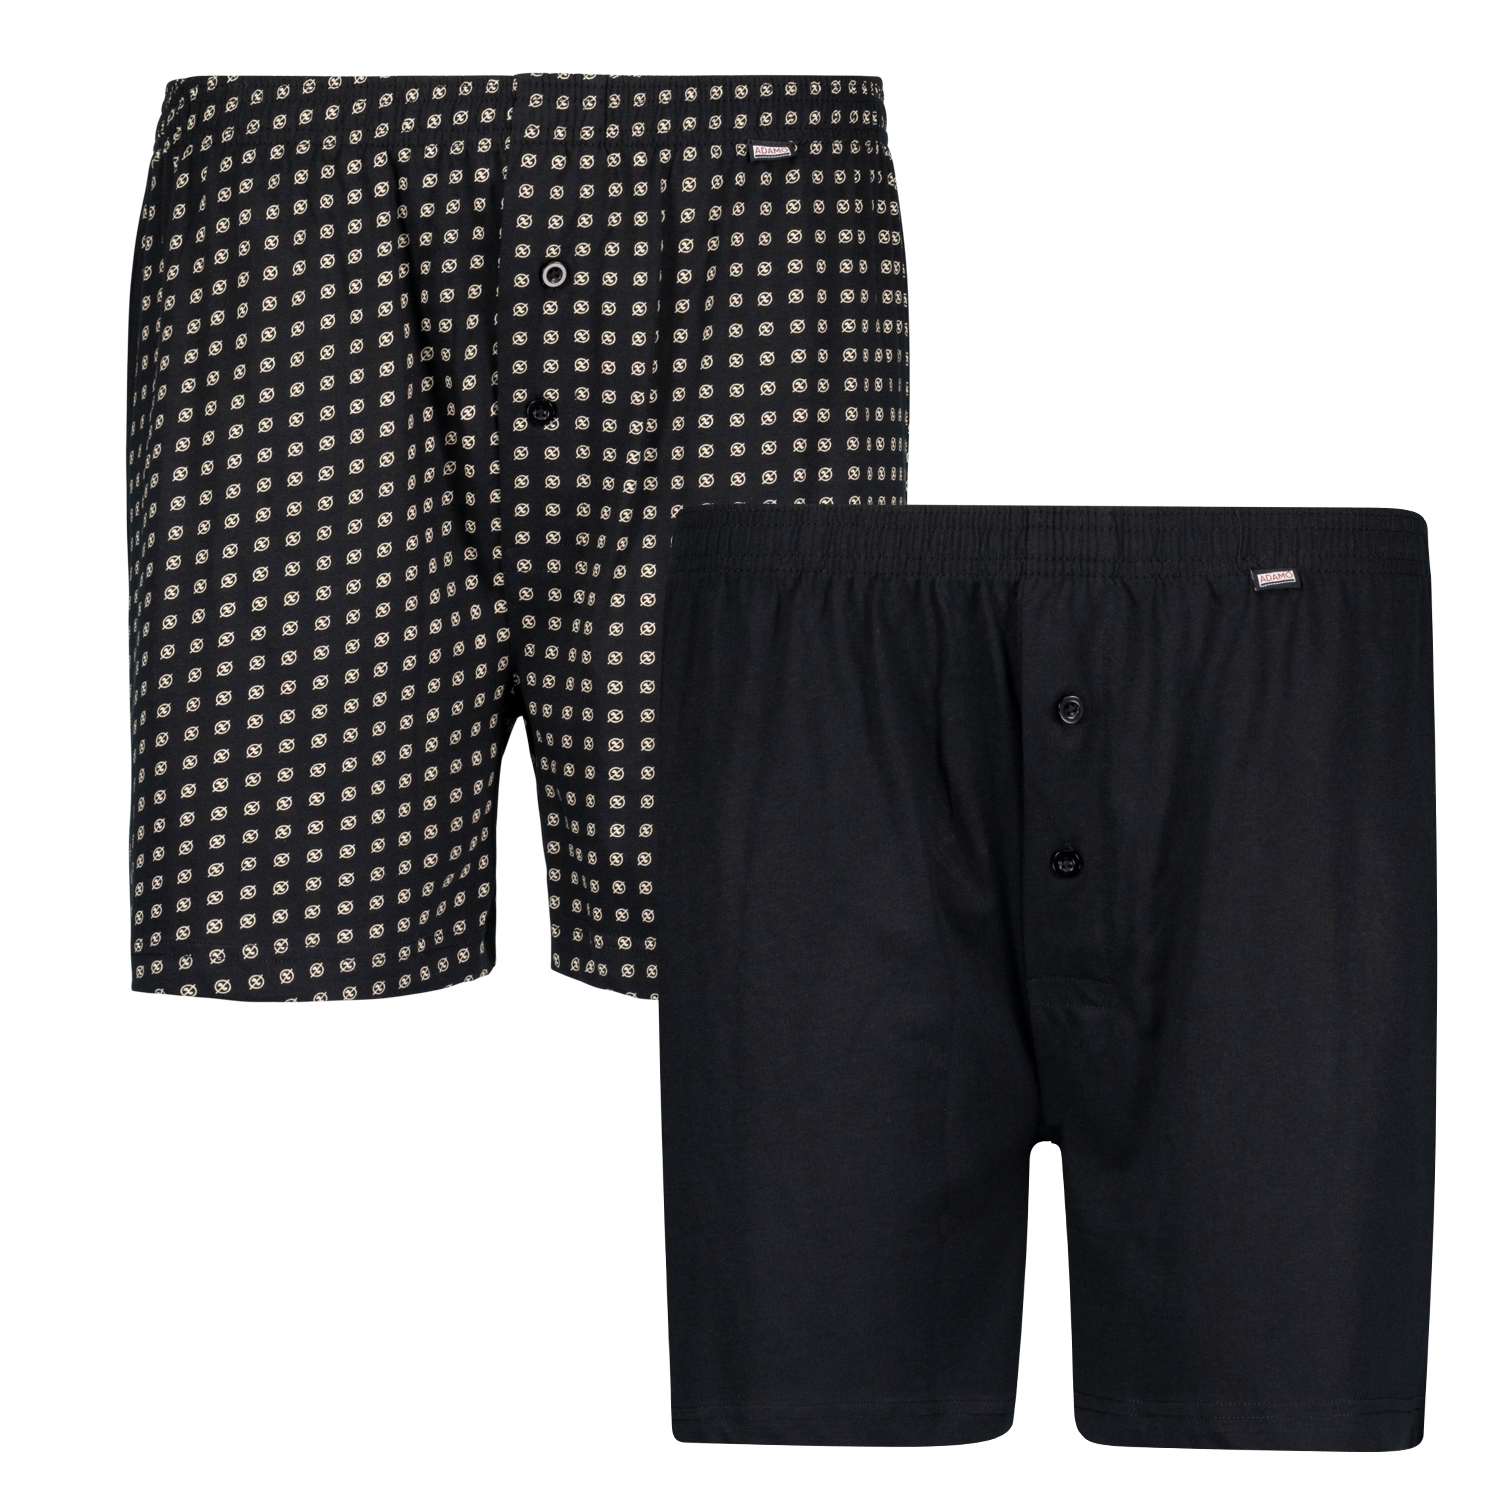 Black DEAN boxershorts by ADAMO in oversize up to 32 (double pack)